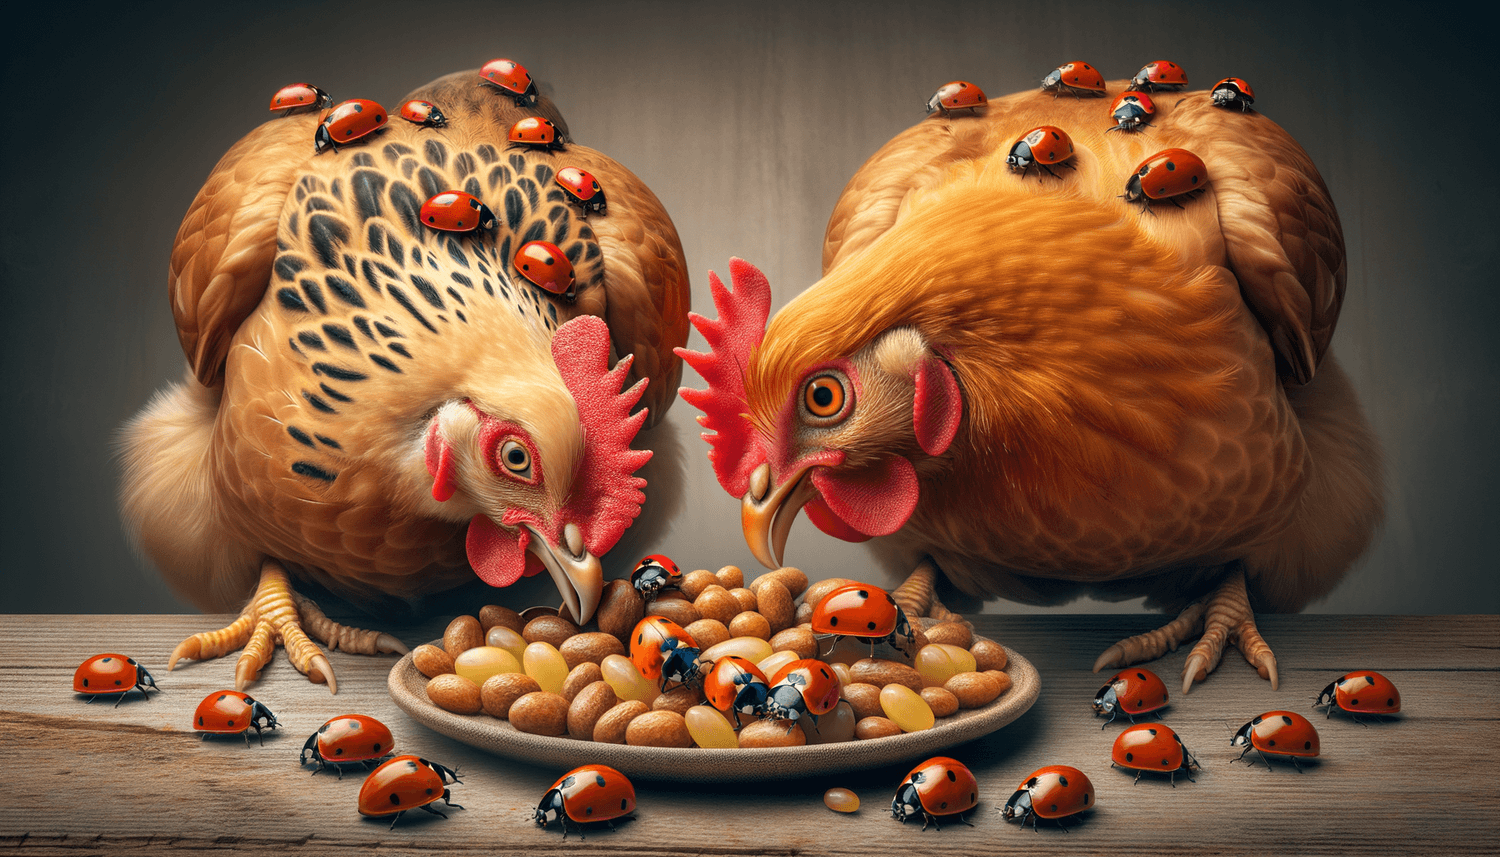 Can Chickens Eat Ladybugs?